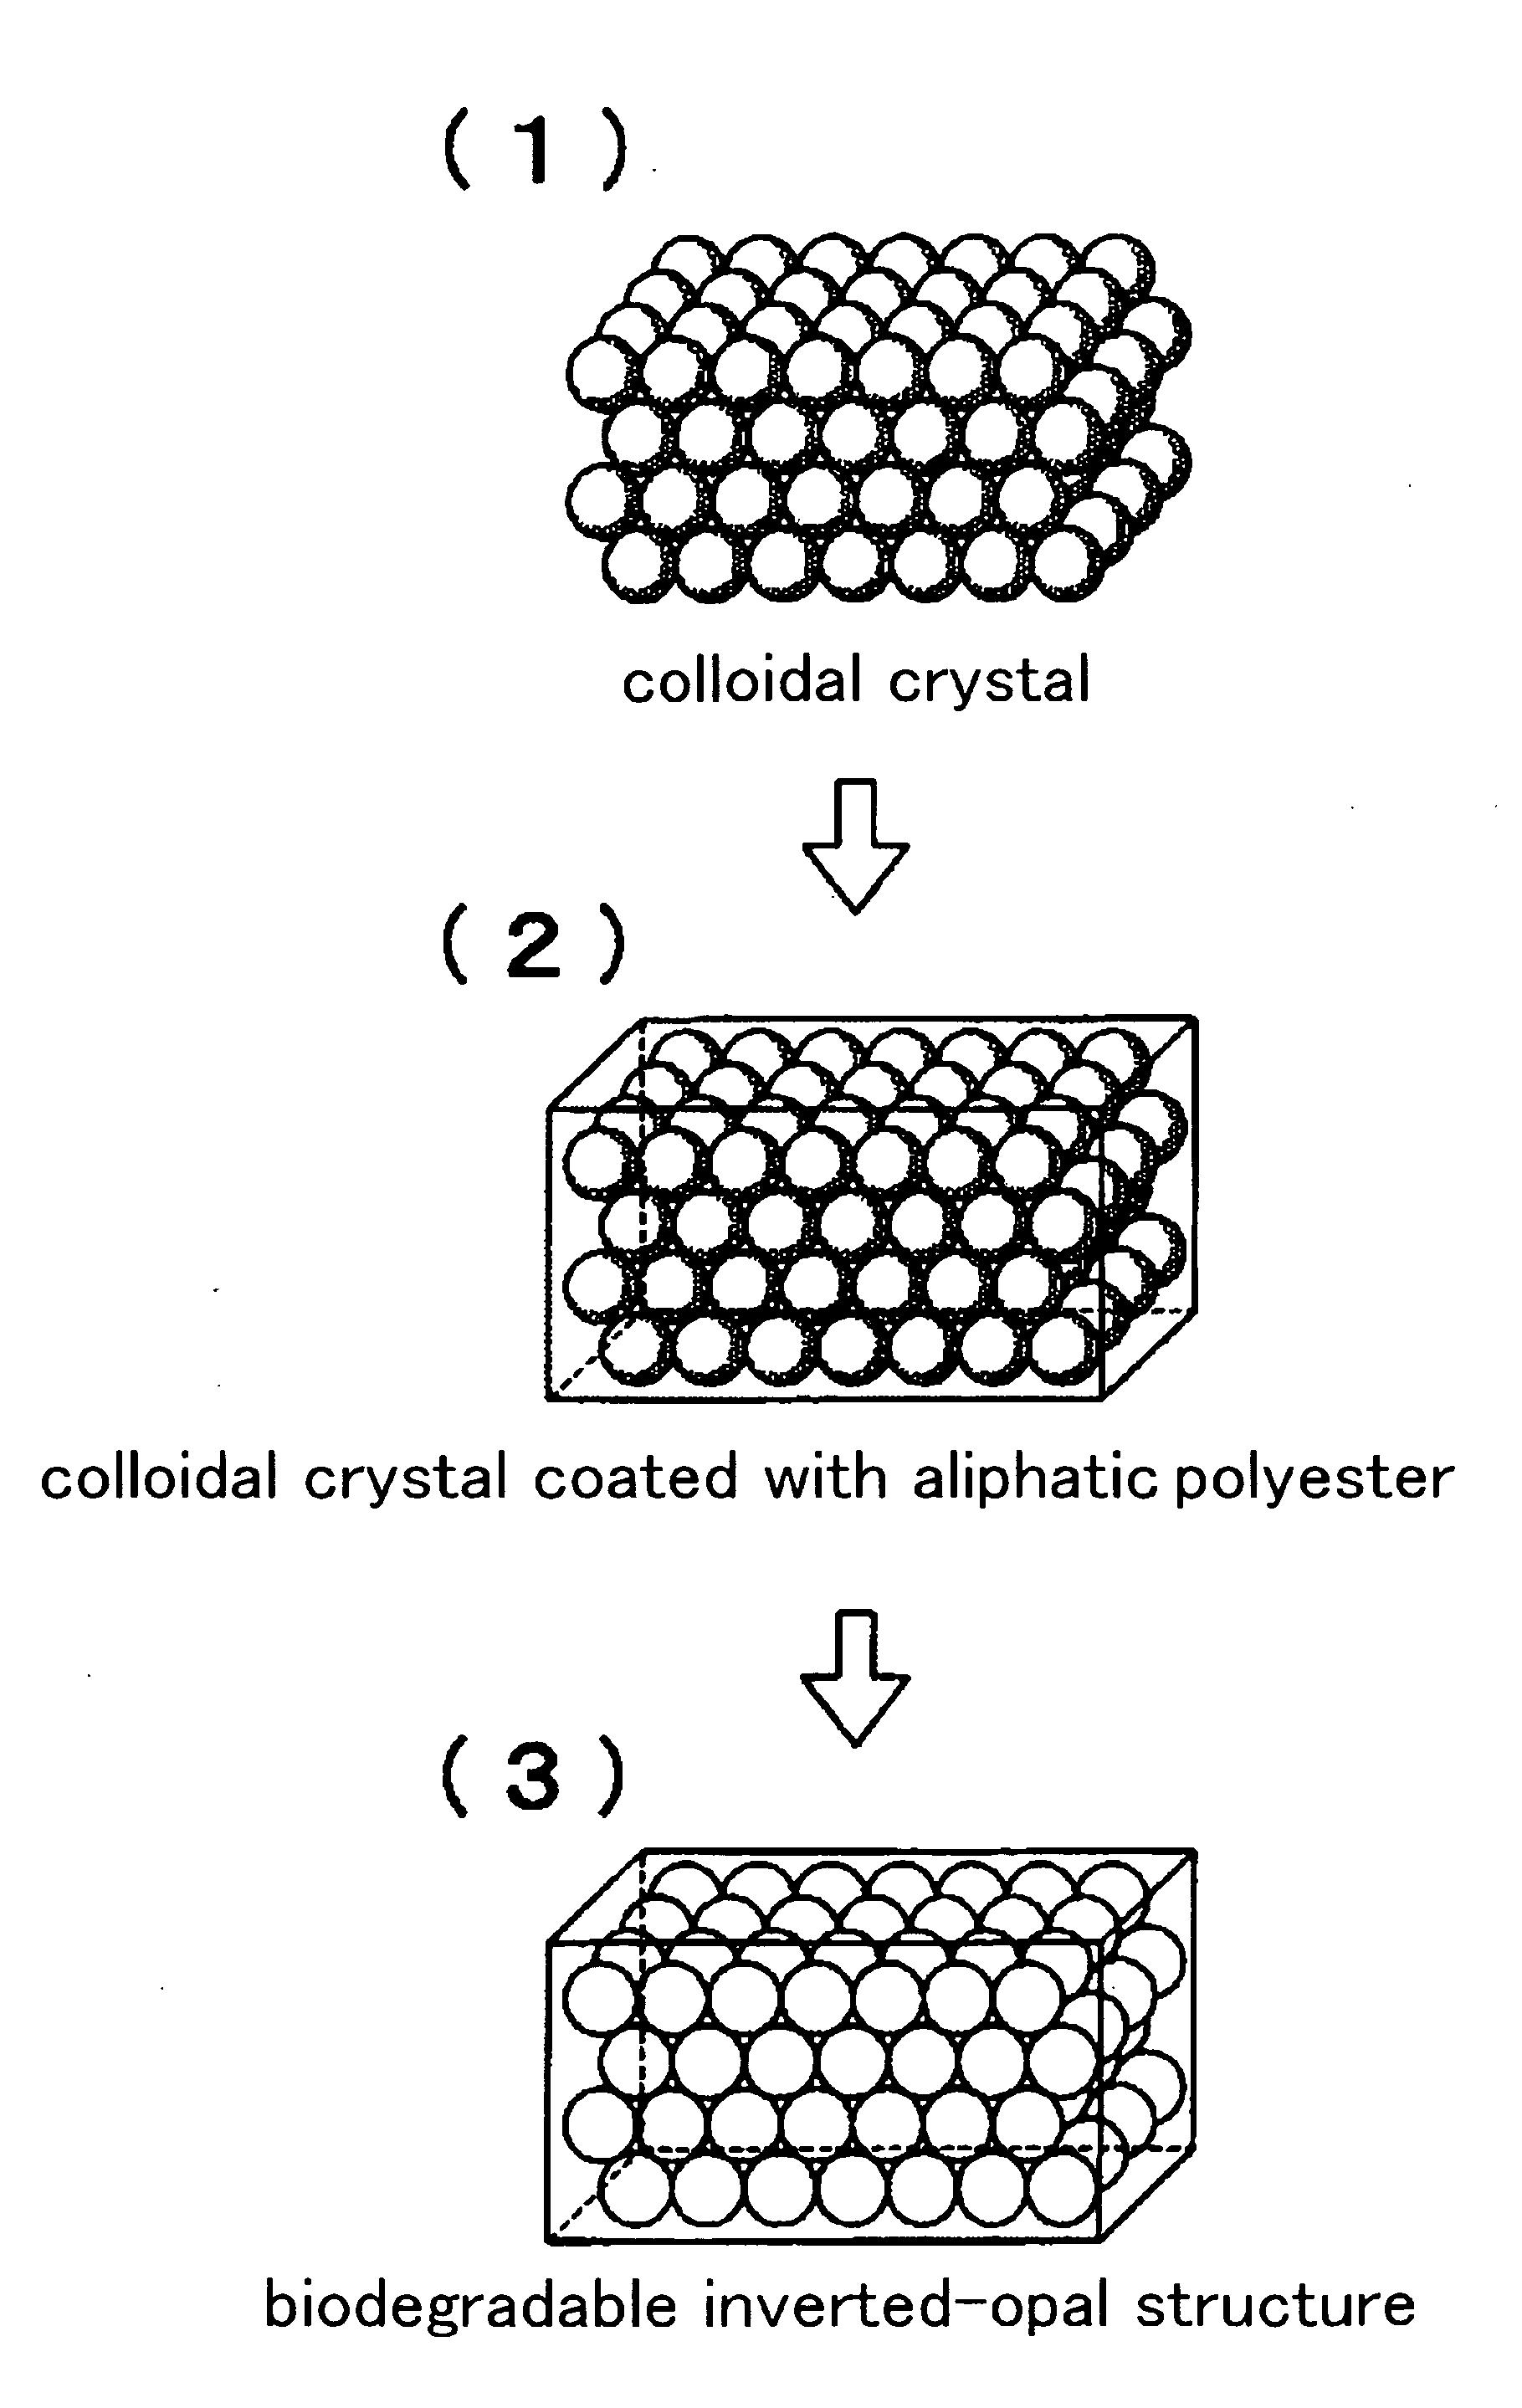 Biodegradable Inverted-Opal Structure, Method for Manufacturing and Using the Same, and Medical Implant Comprising the Biodegradable Inverted-Opal Structure